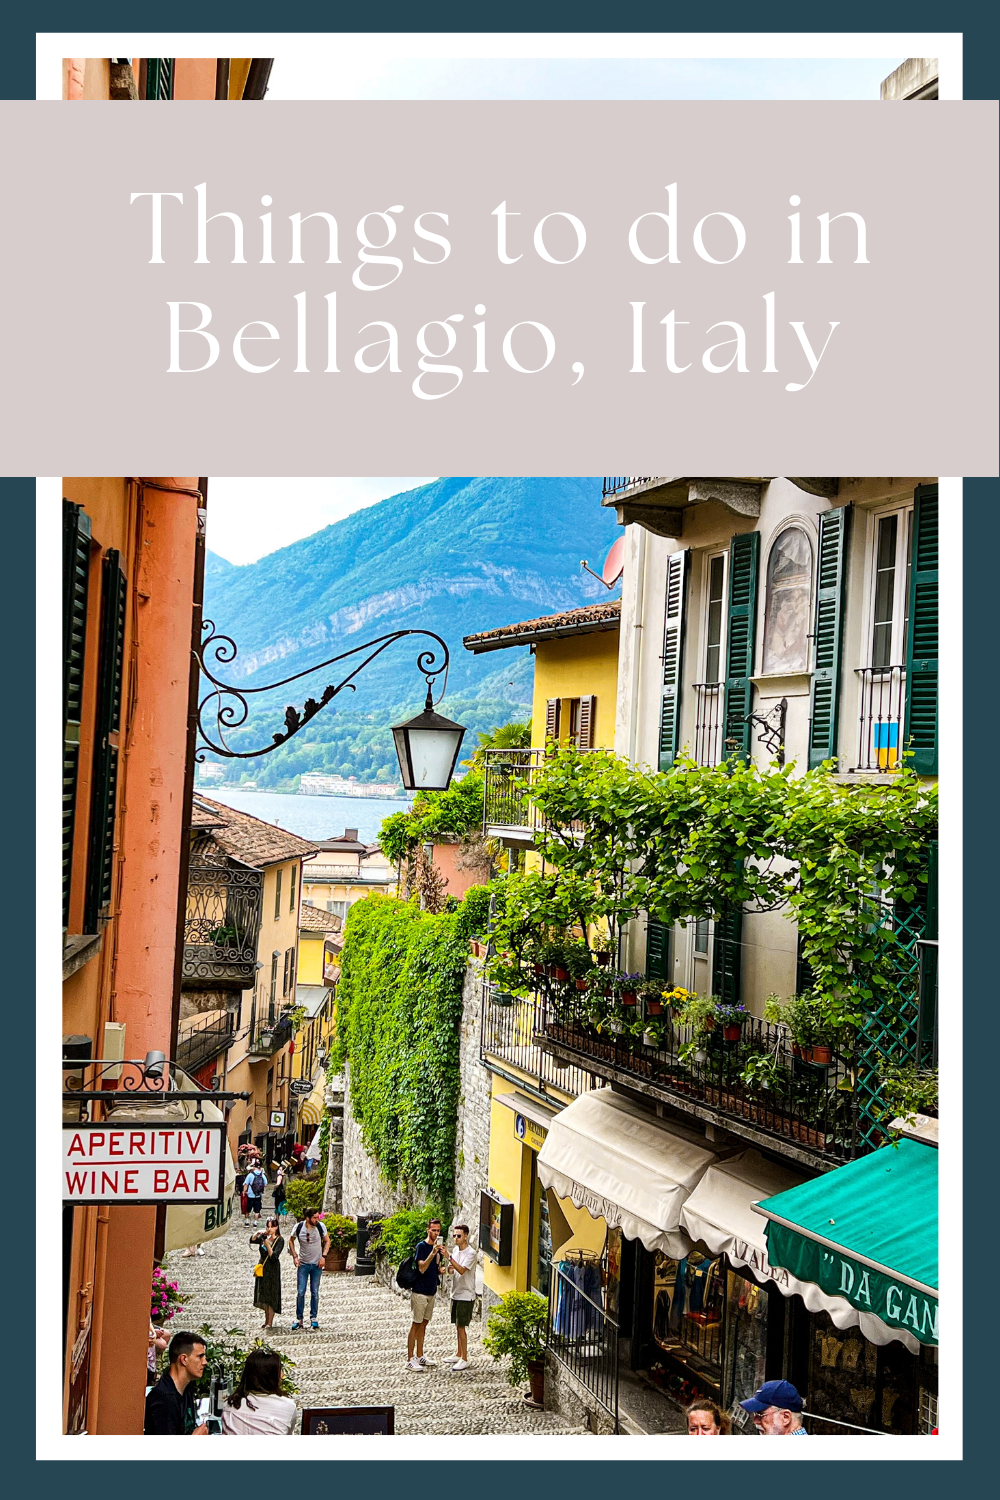 Things to do in Bellagio, by travel blog My Next Pin